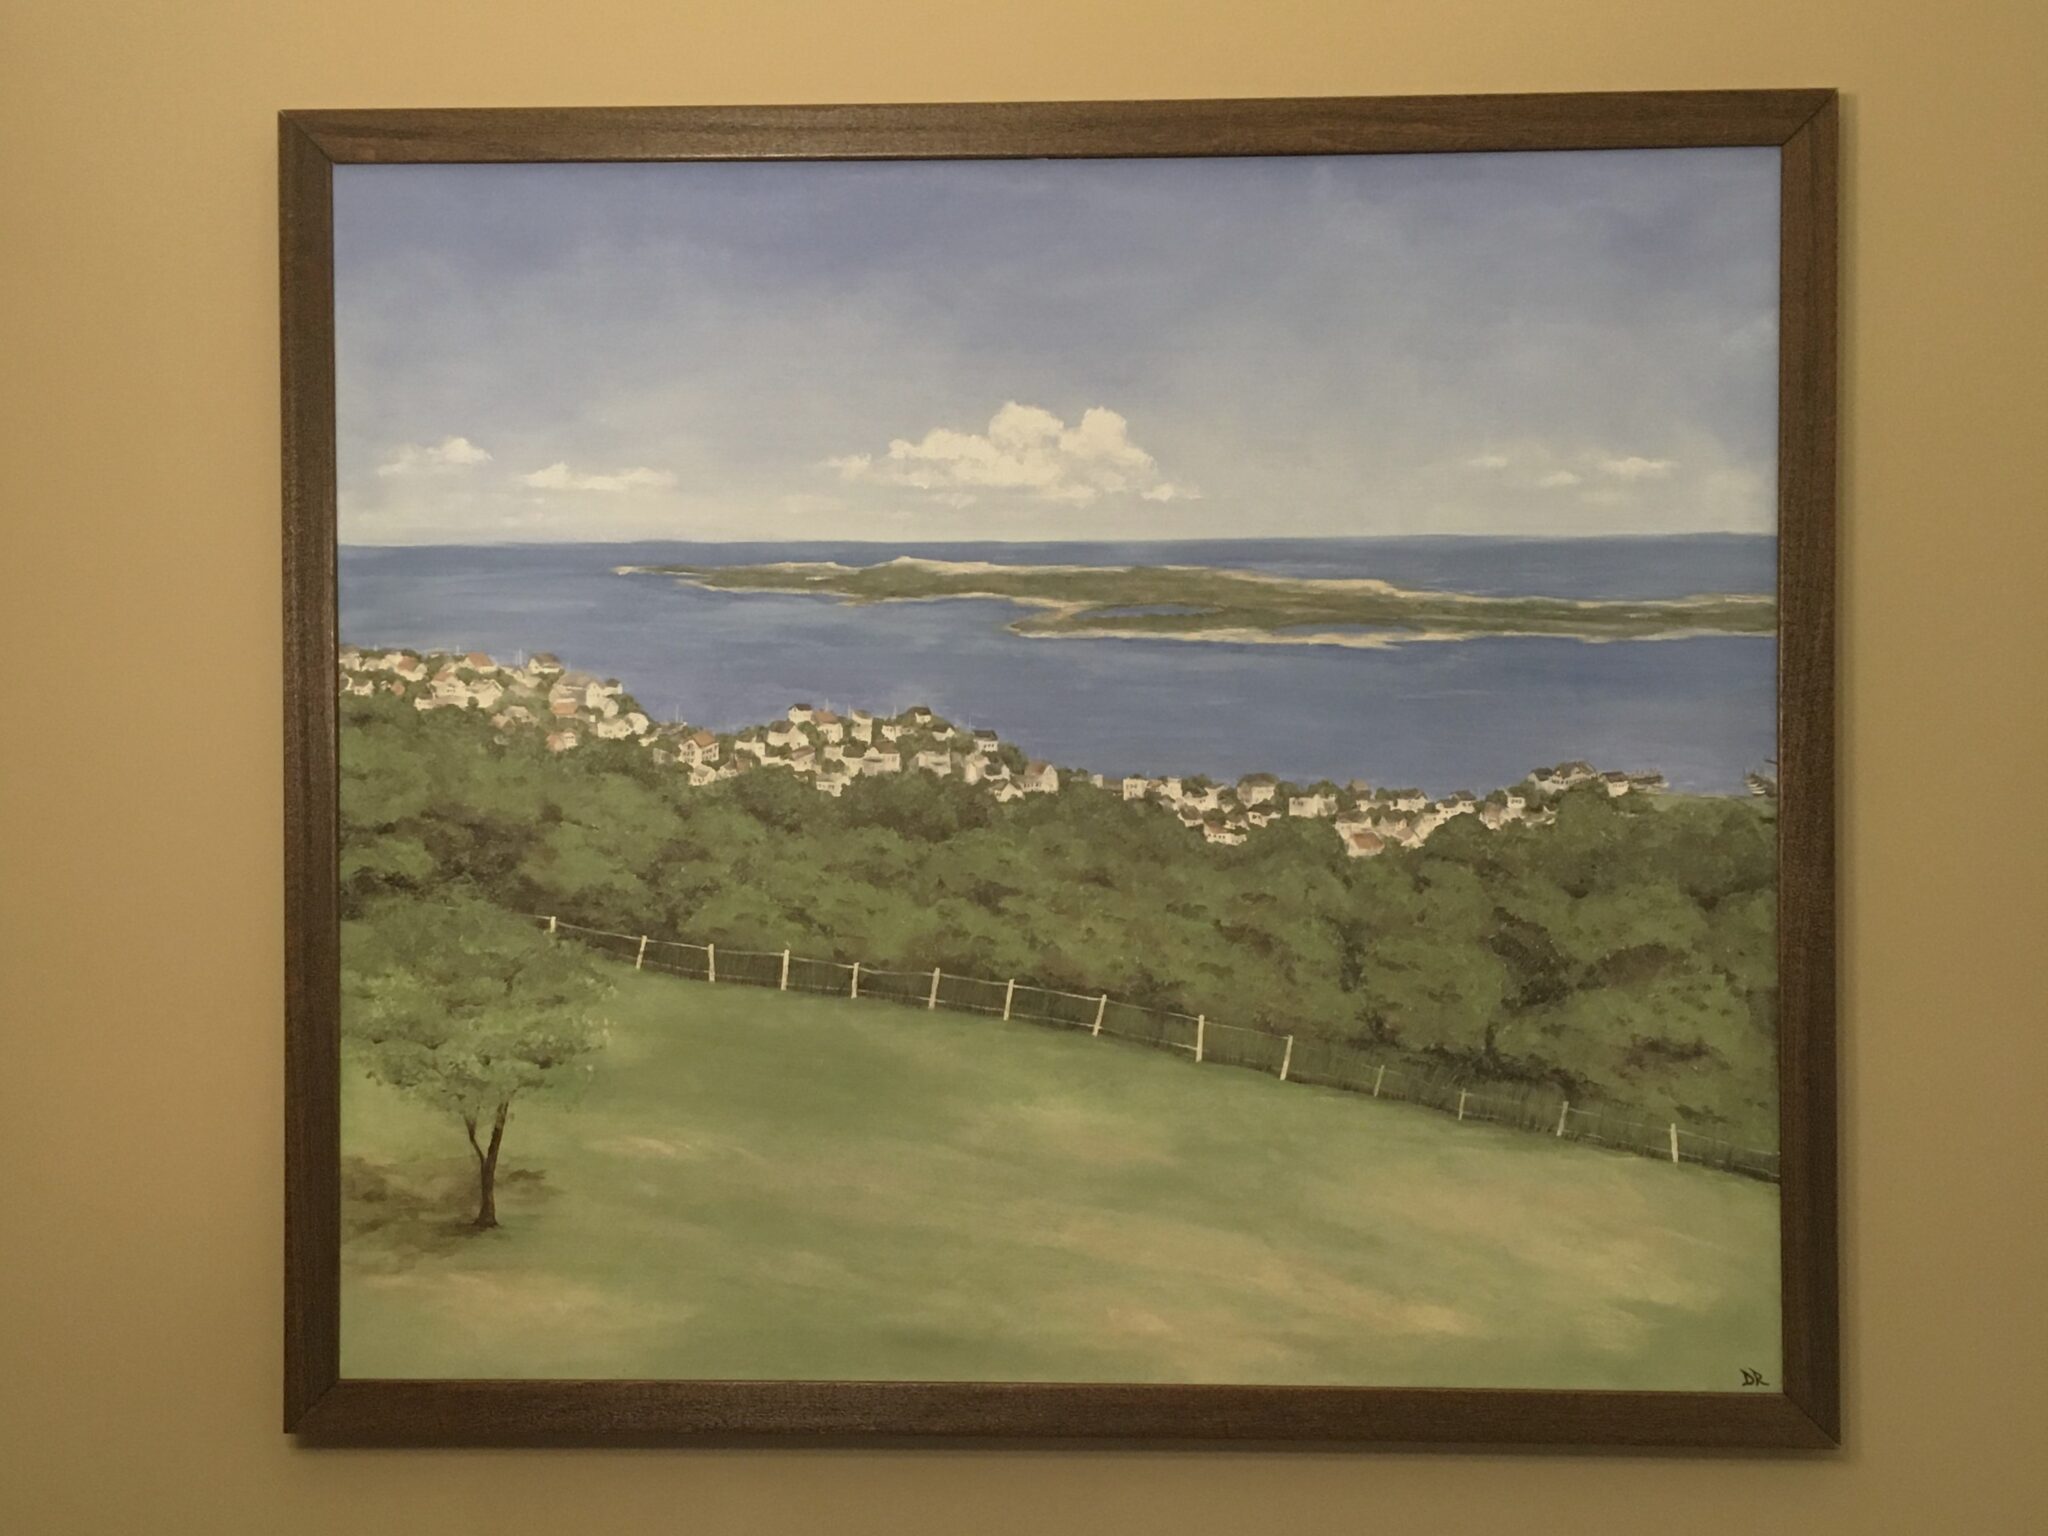 Framed painting of landscape and ocean view, 34 x 40 latex and acrylic on canvas.